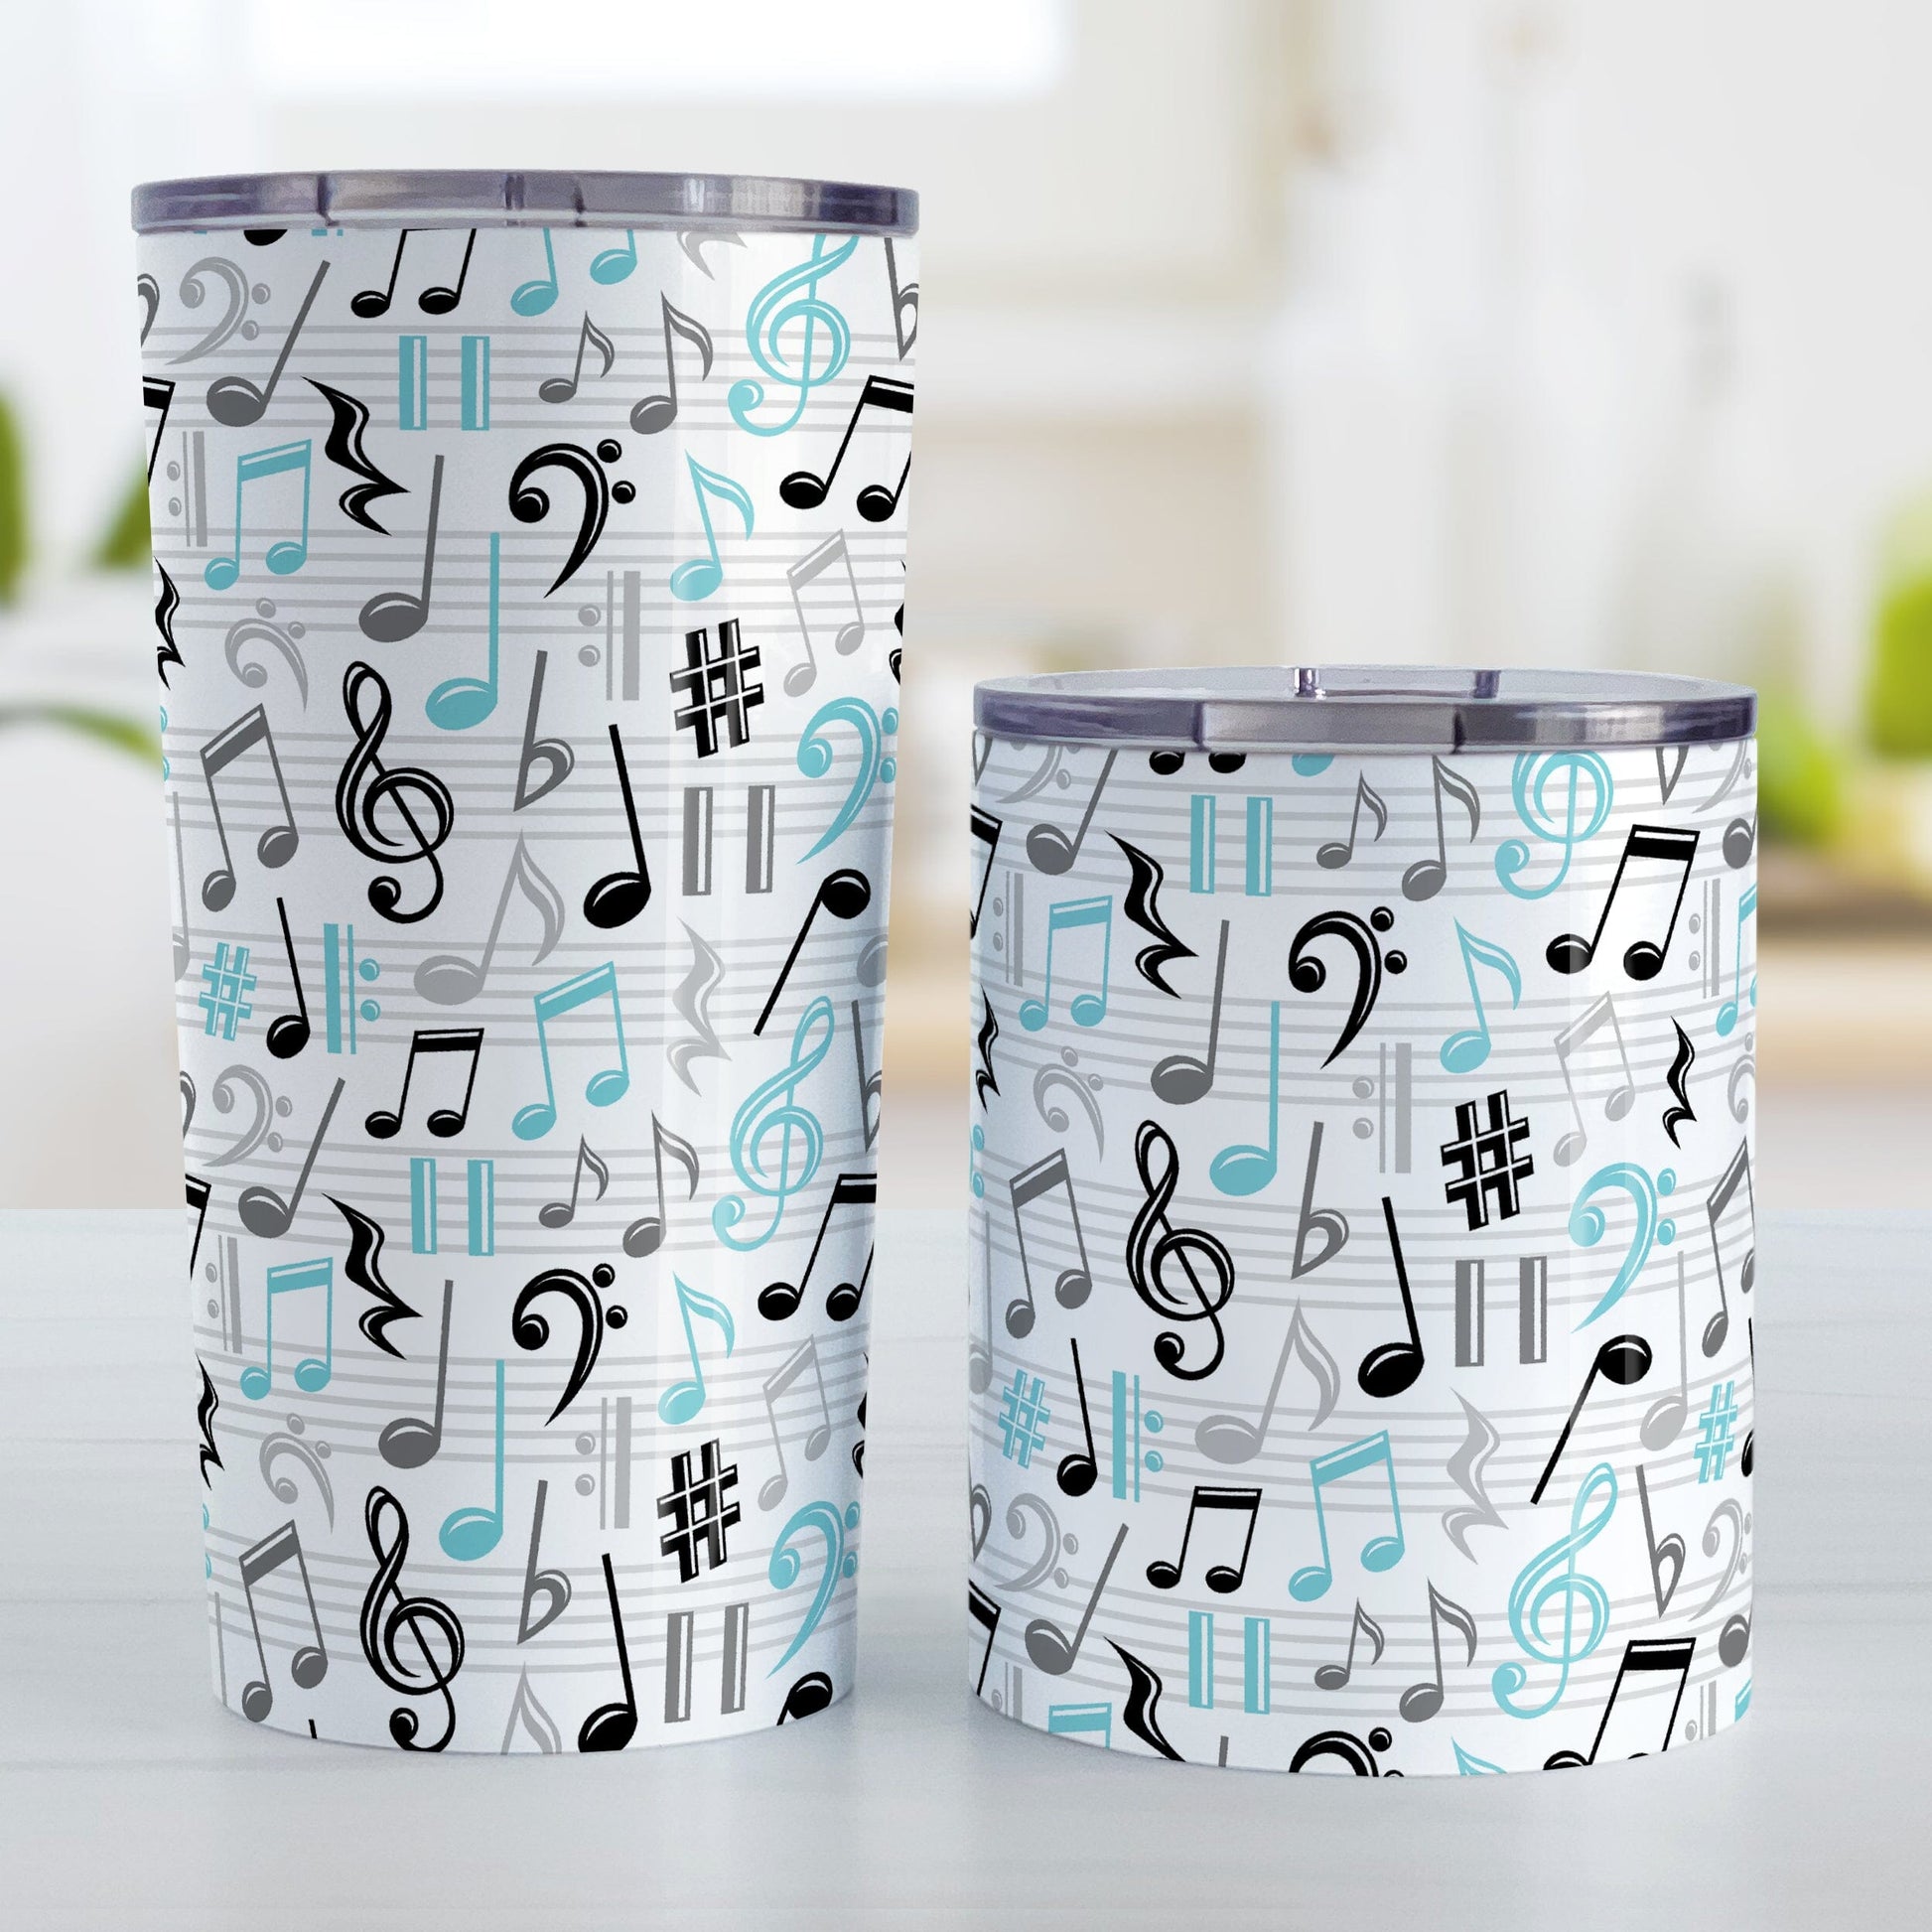 Turquoise Music Notes Pattern Tumbler Cups (20oz or 10oz) at Amy's Coffee Mugs. Stainless steel tumbler cups designed with music notes and symbols in turquoise, black, and gray in a pattern that wraps around the cups. Photo shows both sized cups on a table next to each other.